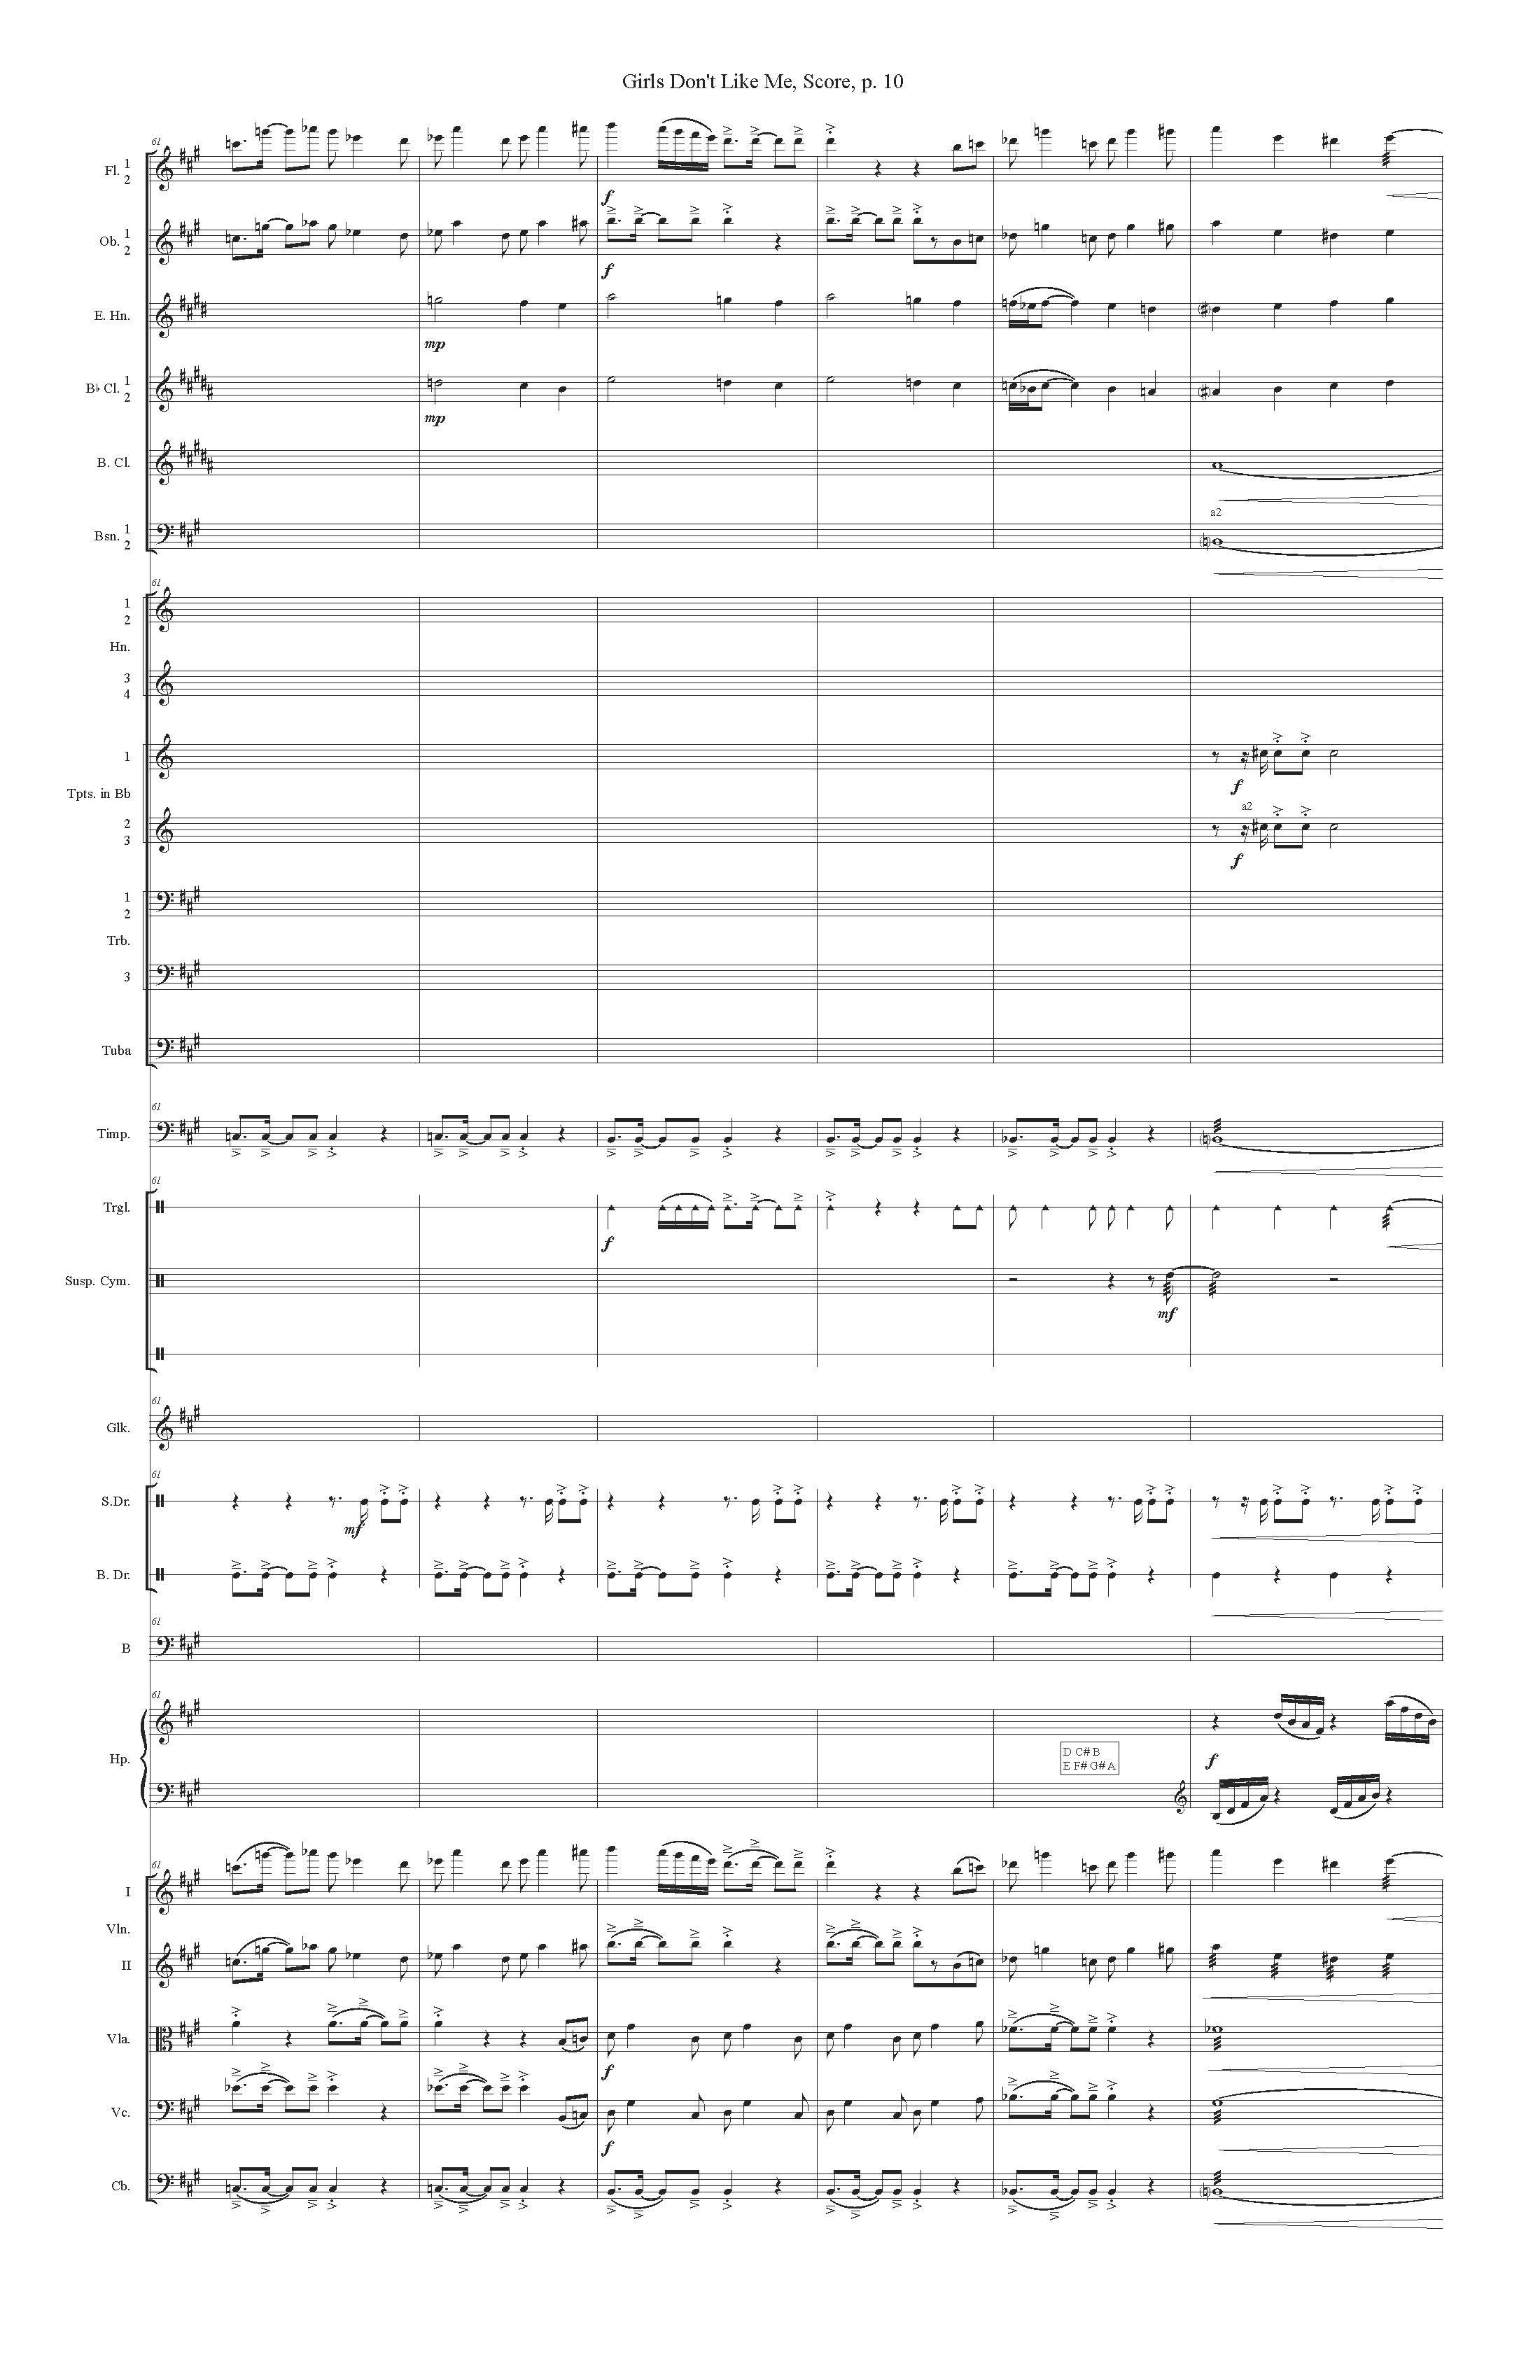 GIRLS DON'T LIKE ME ORCH - Score_Page_10.jpg